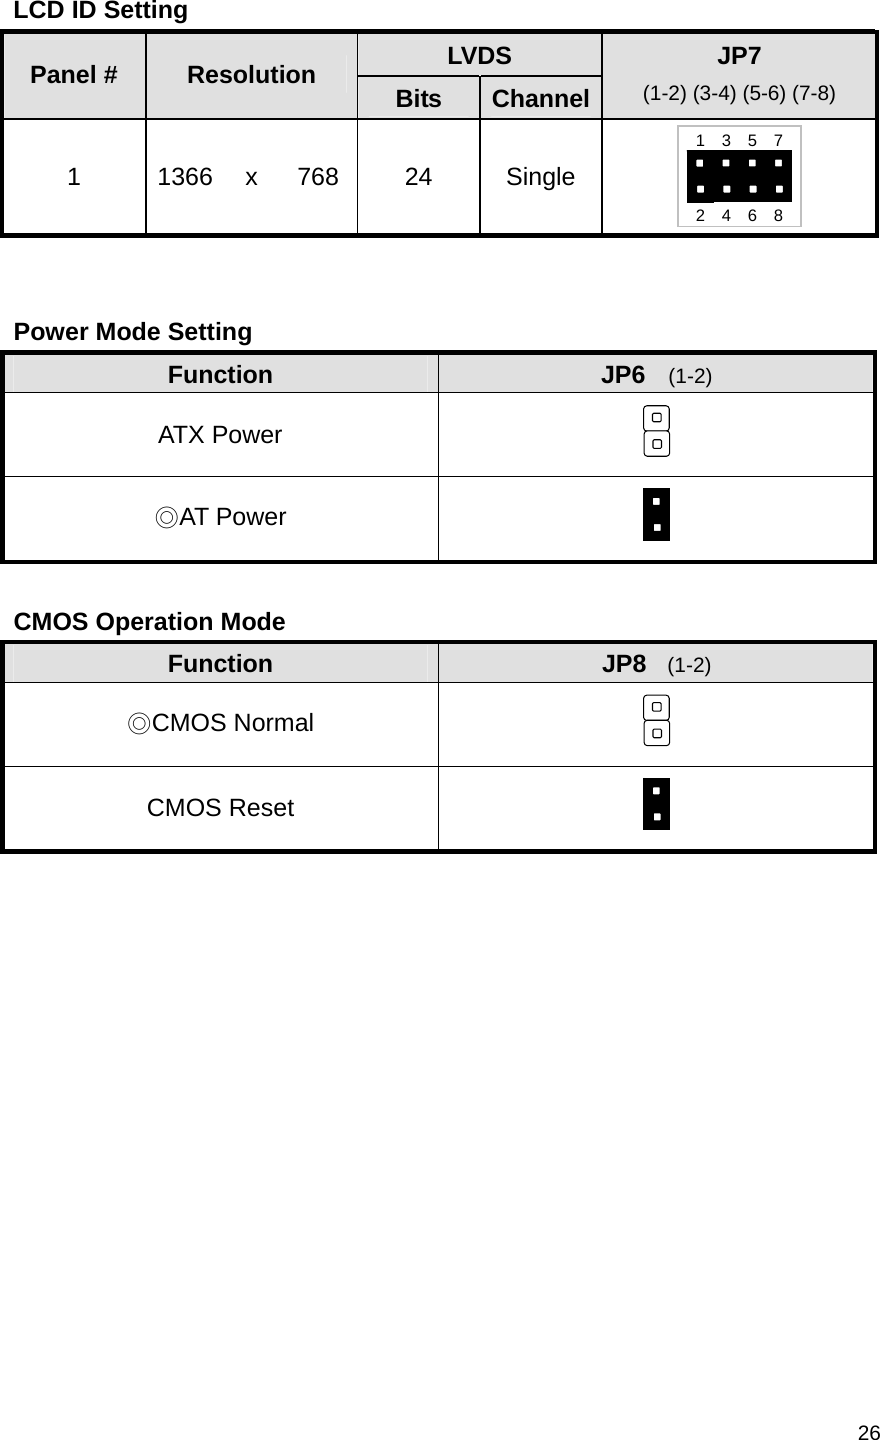  26  LCD ID Setting LVDS Panel #  Resolution  Bits  ChannelJP7  (1-2) (3-4) (5-6) (7-8) 1 1366 x 768 24 Single    Power Mode Setting Function  JP6   (1-2) ATX Power   ◎AT Power    CMOS Operation Mode Function  JP8  (1-2) ◎CMOS Normal   CMOS Reset     1  3  5  7     2  4  6  8 